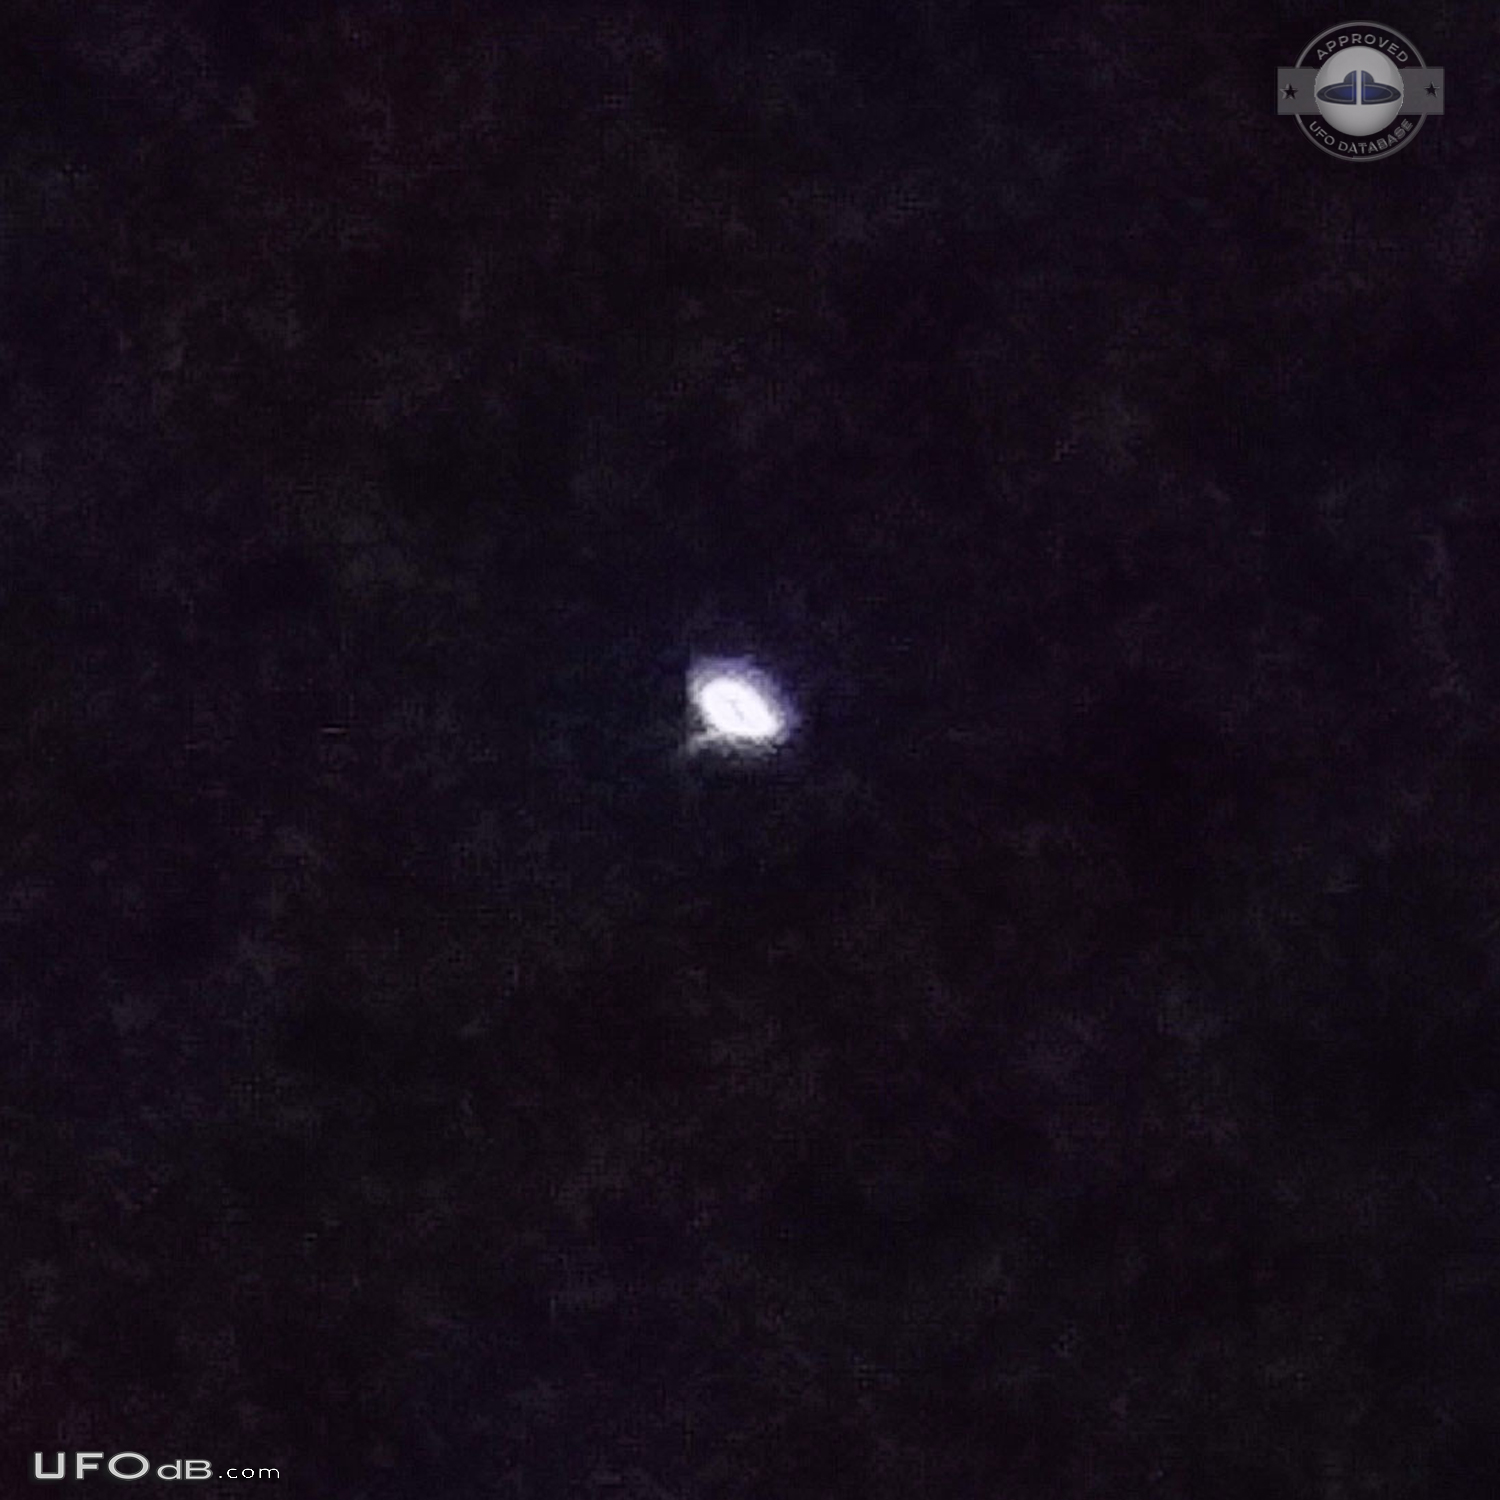 Seen from distance unmoving much larger other stars - Gatineau Quebec  UFO Picture #767-2